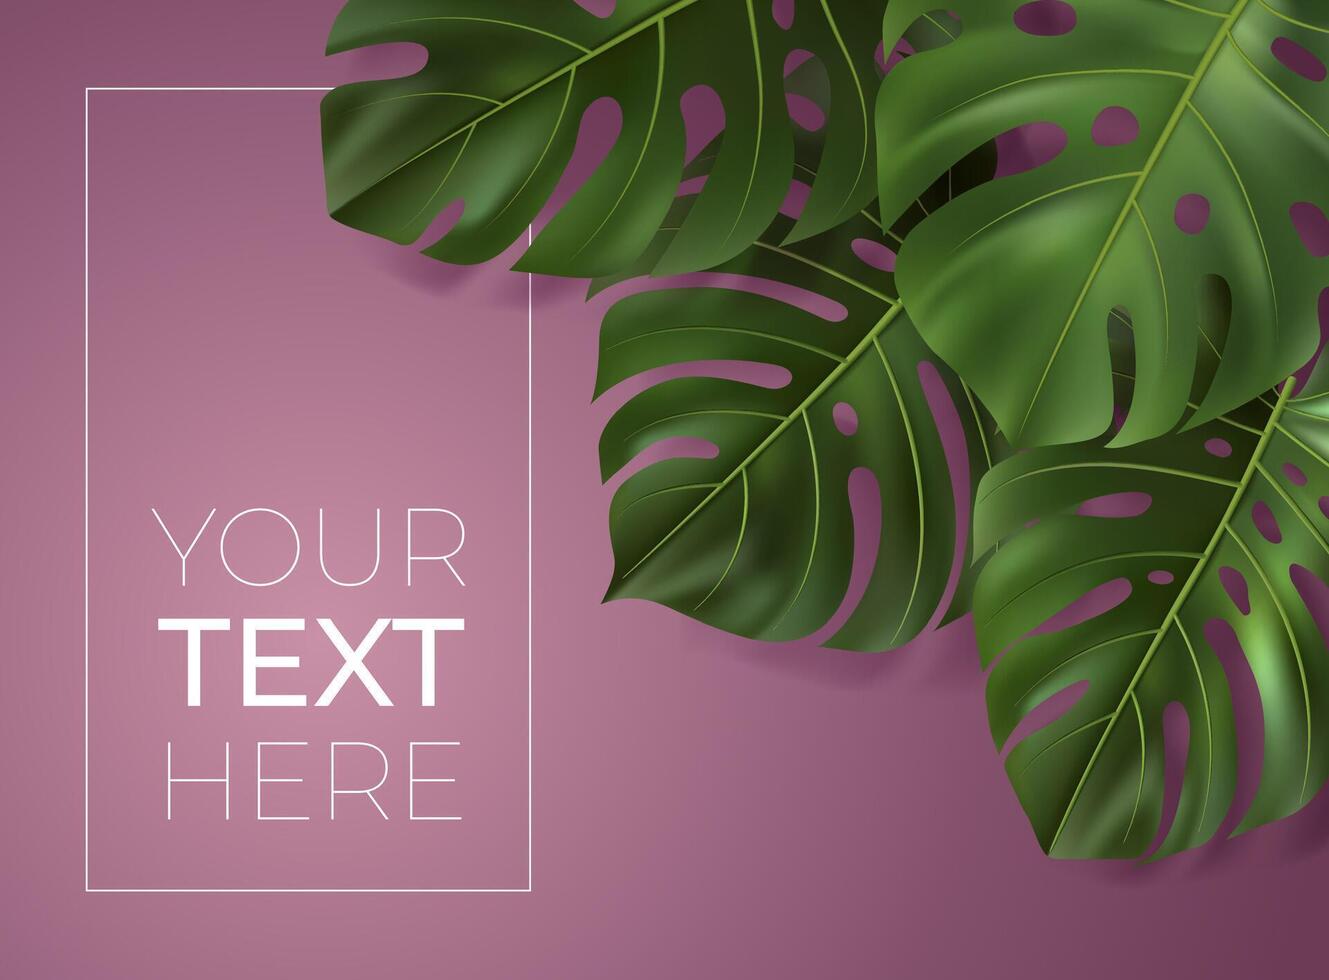 Vector poster with realistic green tropical leaves. Monstera leaf on pink background. Botanical illustration with copy space for your text. Template for banner, invitation card, ad, web design.